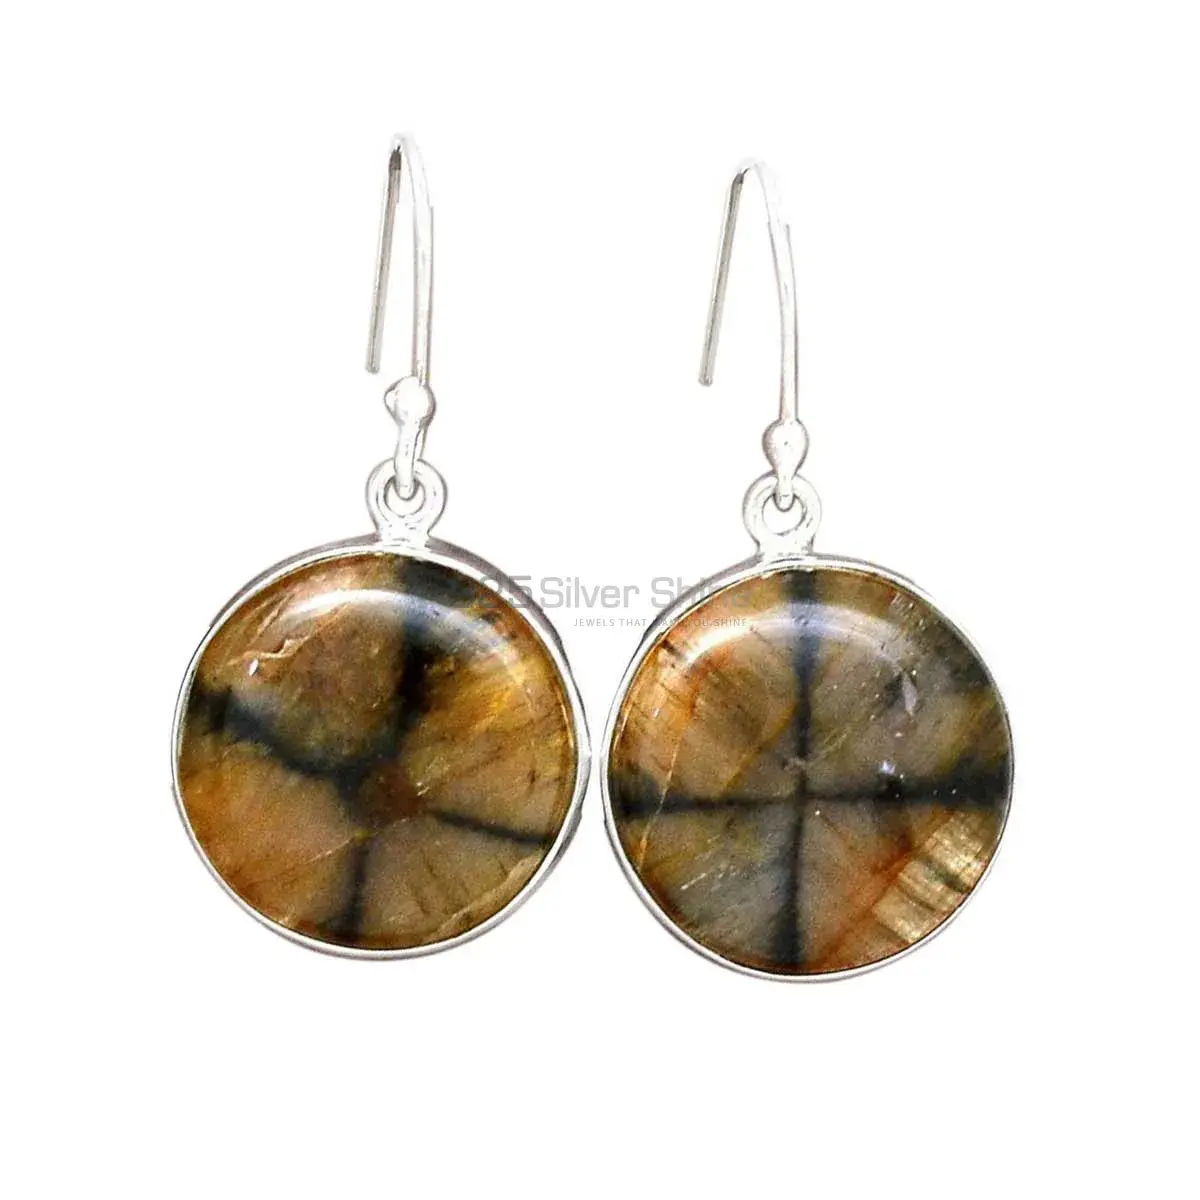 Affordable 925 Sterling Silver Handmade Earrings Manufacturer In Chiastolite Gemstone Jewelry 925SE2748_2